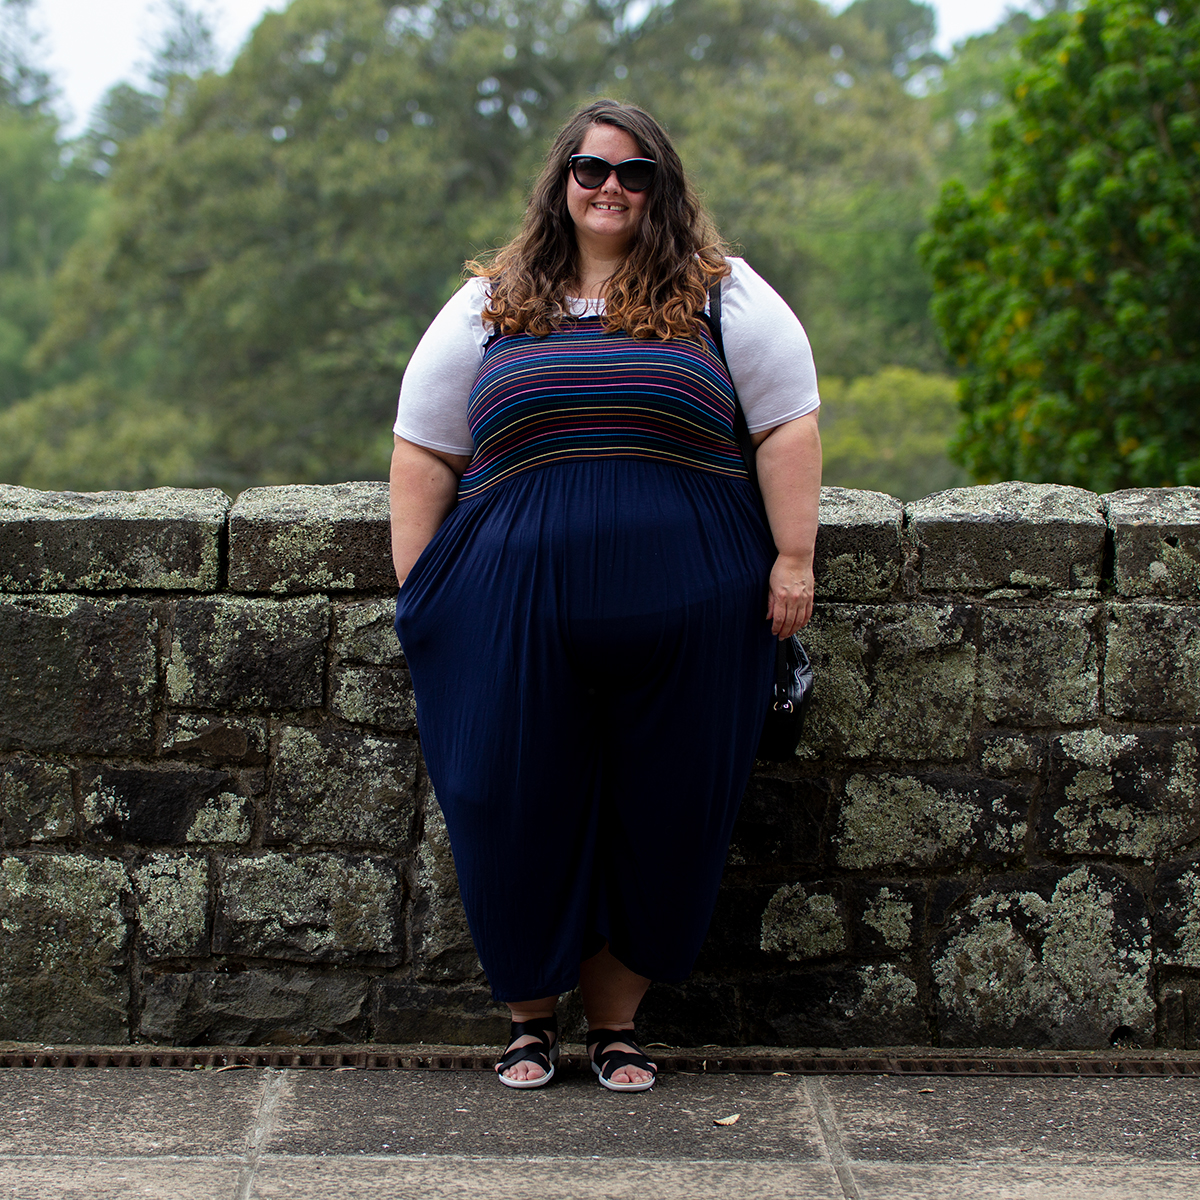 ModCloth Clothing Haul - This is Meagan Kerr